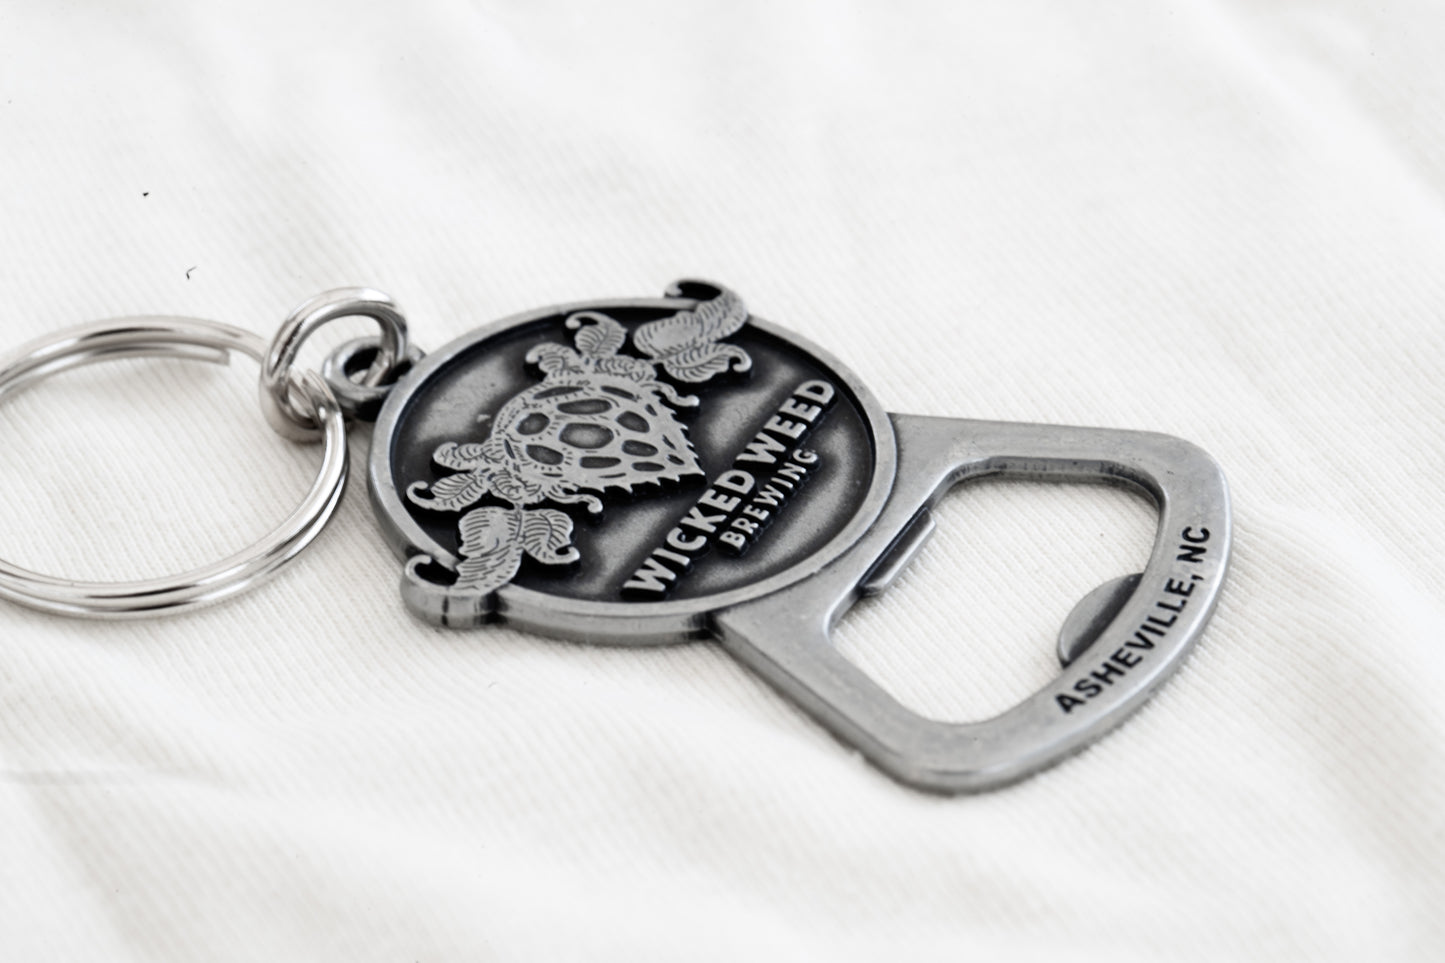 Wicked Weed Keychain